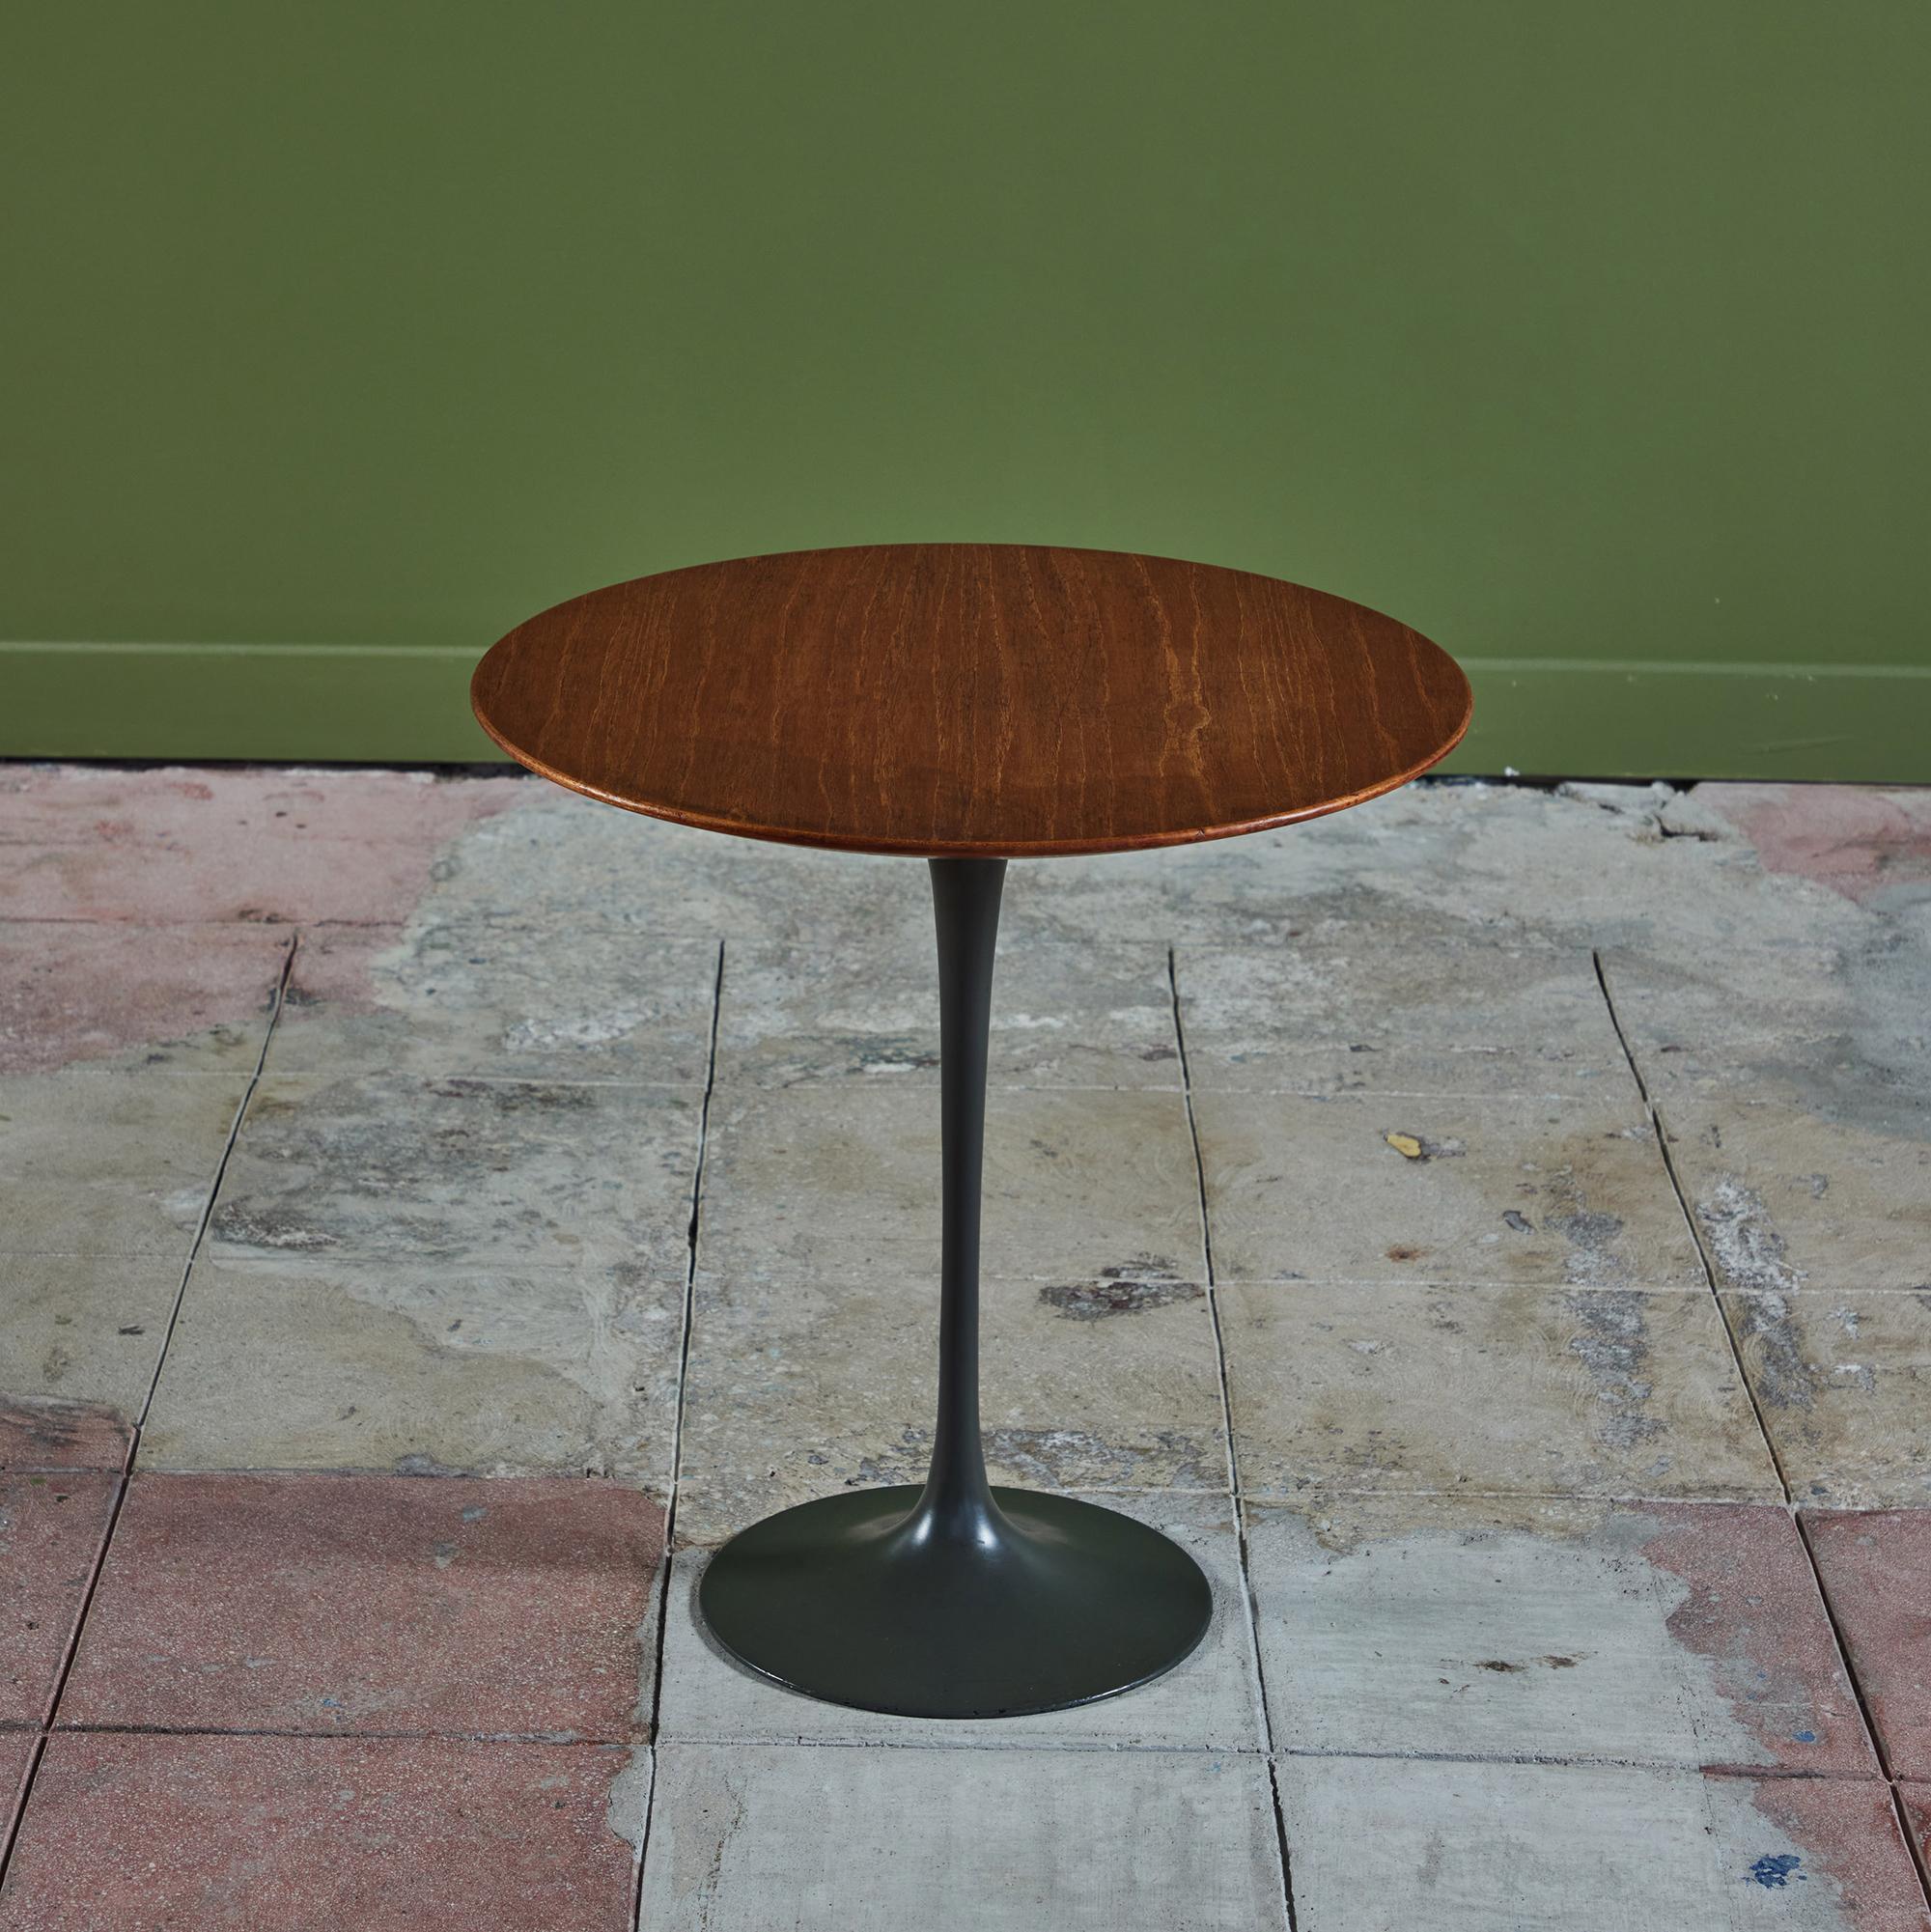 One of Saarinen’s most enduring designs, part of the Pedestal Collection and designed in 1957, this side table features a forest green enameled heavy molded cast aluminum base with a round walnut table top.

Dimensions 
20